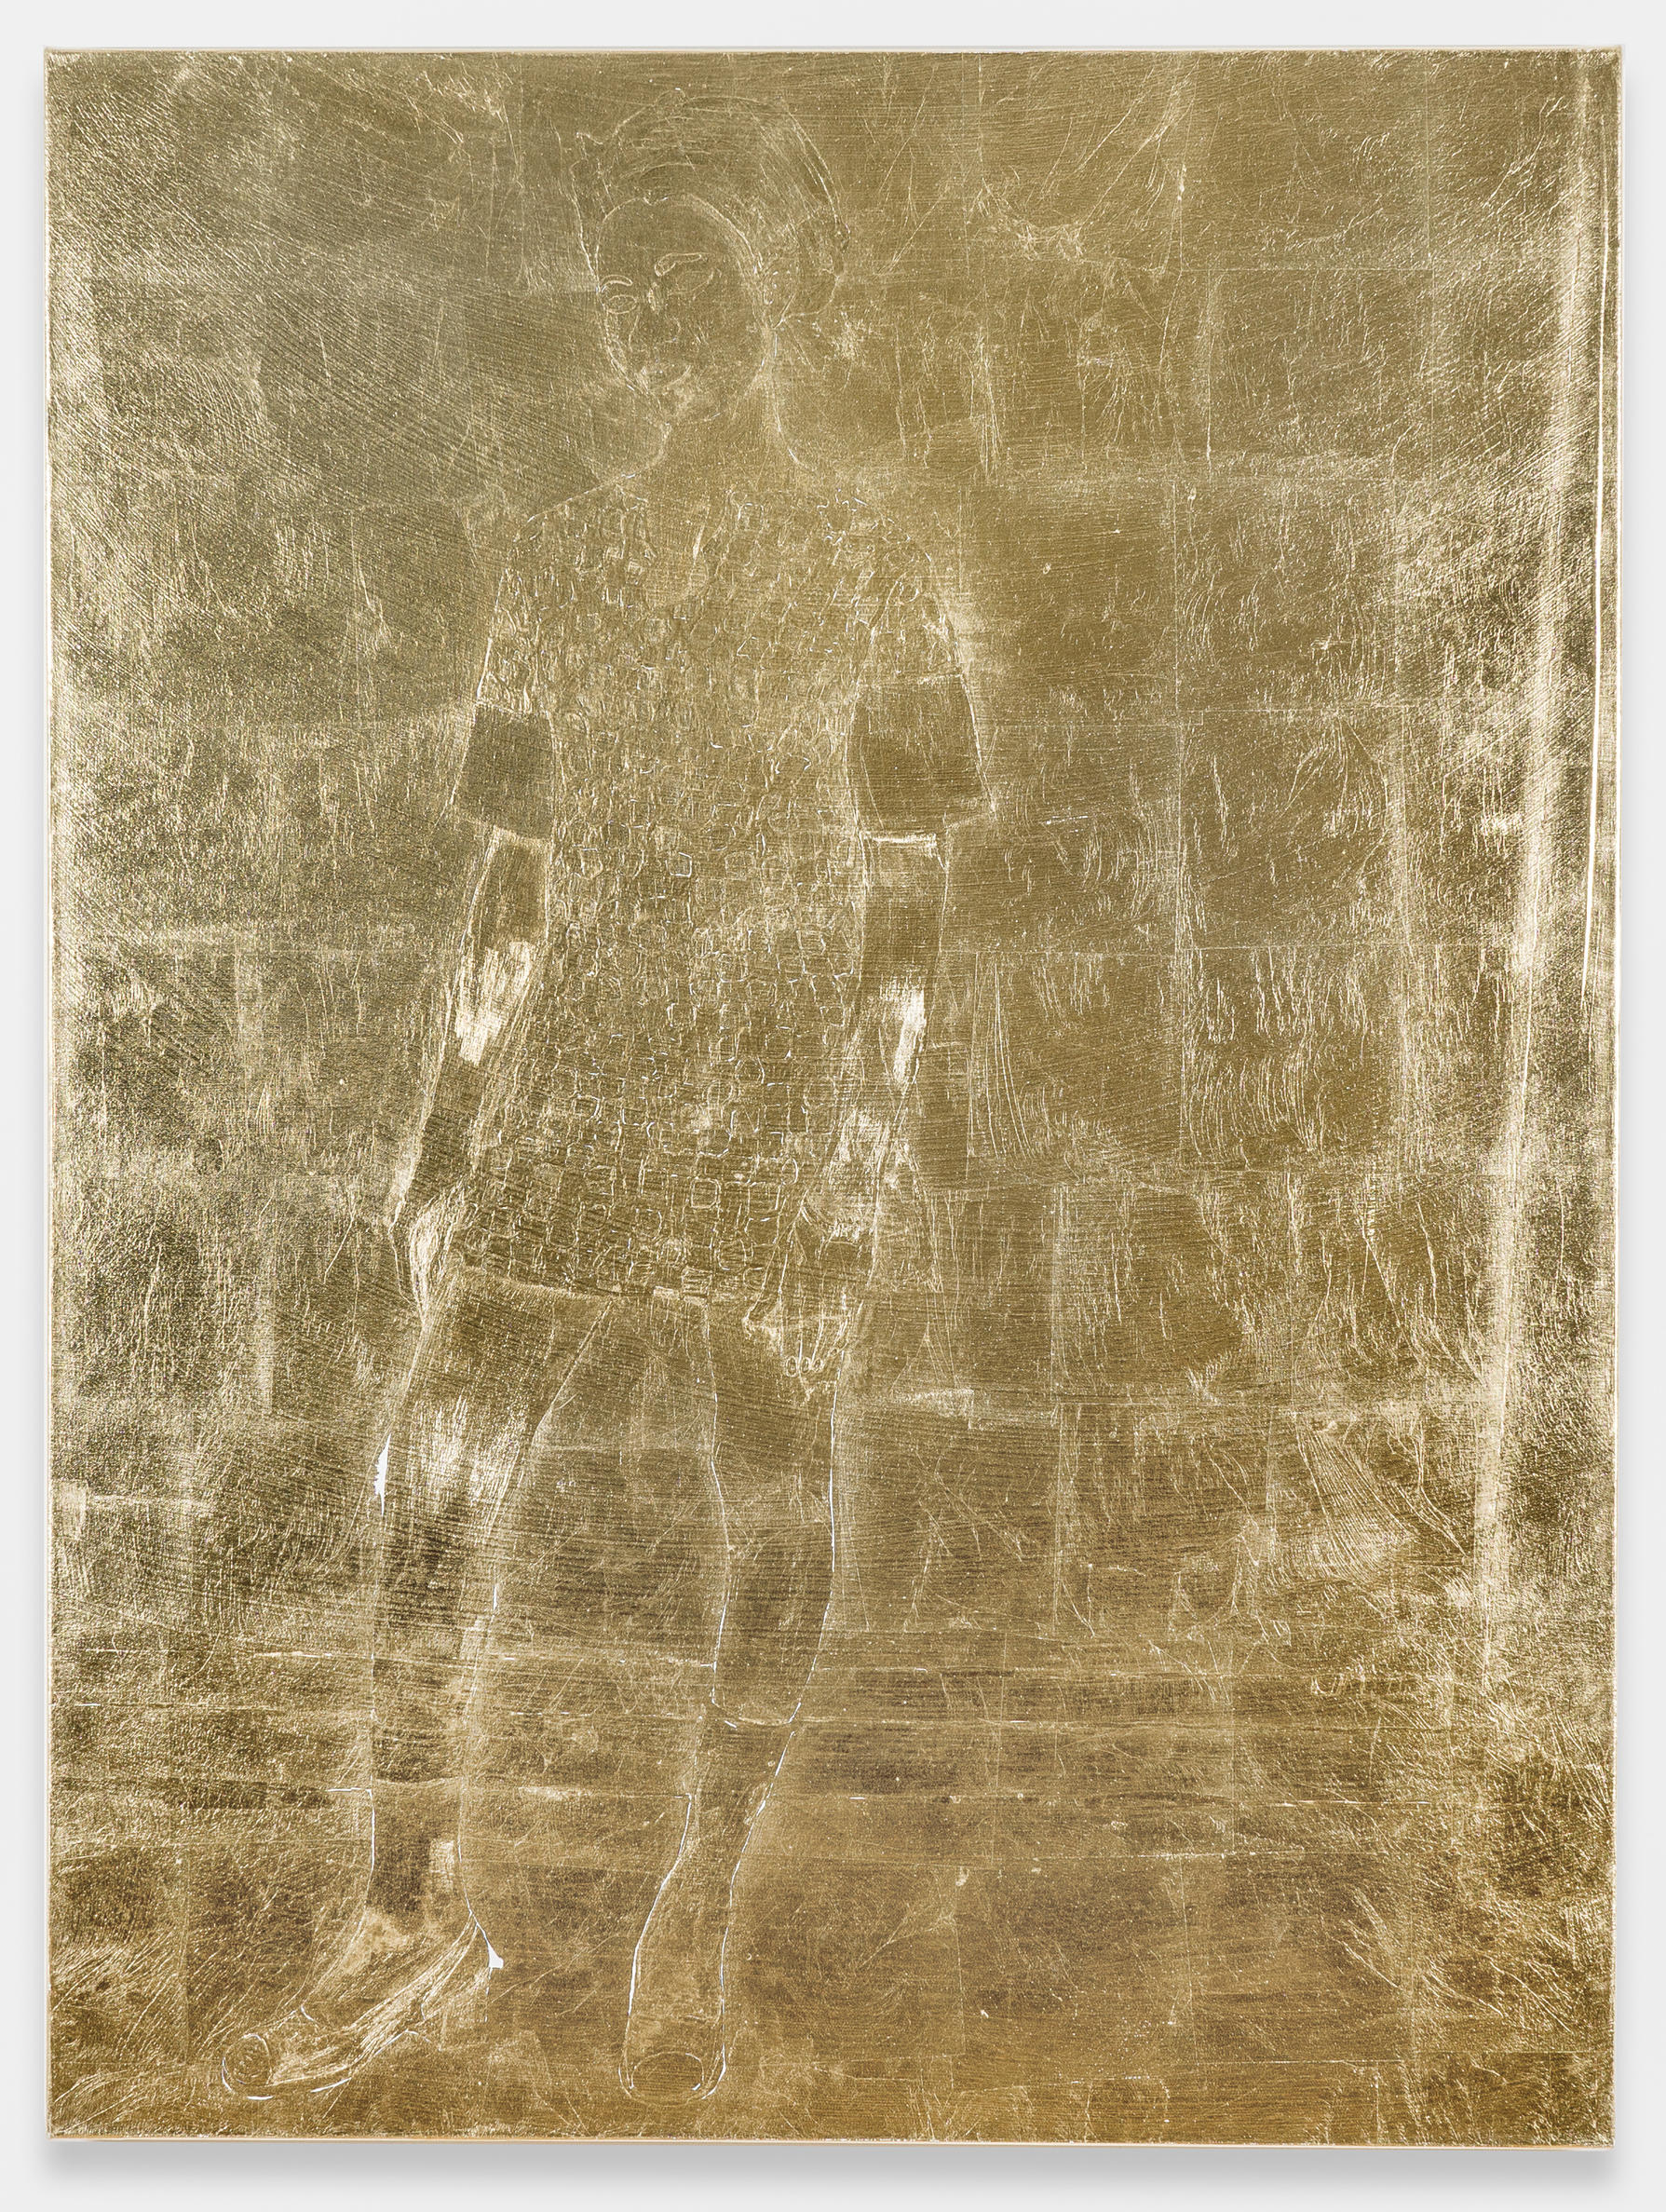 This composition of gold leaf on canvas produces a mottled image with white, gold and black areas. This piece is 4 feet by 3 feet. The central figure is a dark-skinned woman wearing a checkered dress standing in contrapposto with her weight on the foot to our right. She faces the viewer and appears to have large facial features and a scarf covering her hair. Her head is tilted slightly to our left. She wears a dress that falls to mid-thigh with a simple neckline and short sleeves that end with a dark border